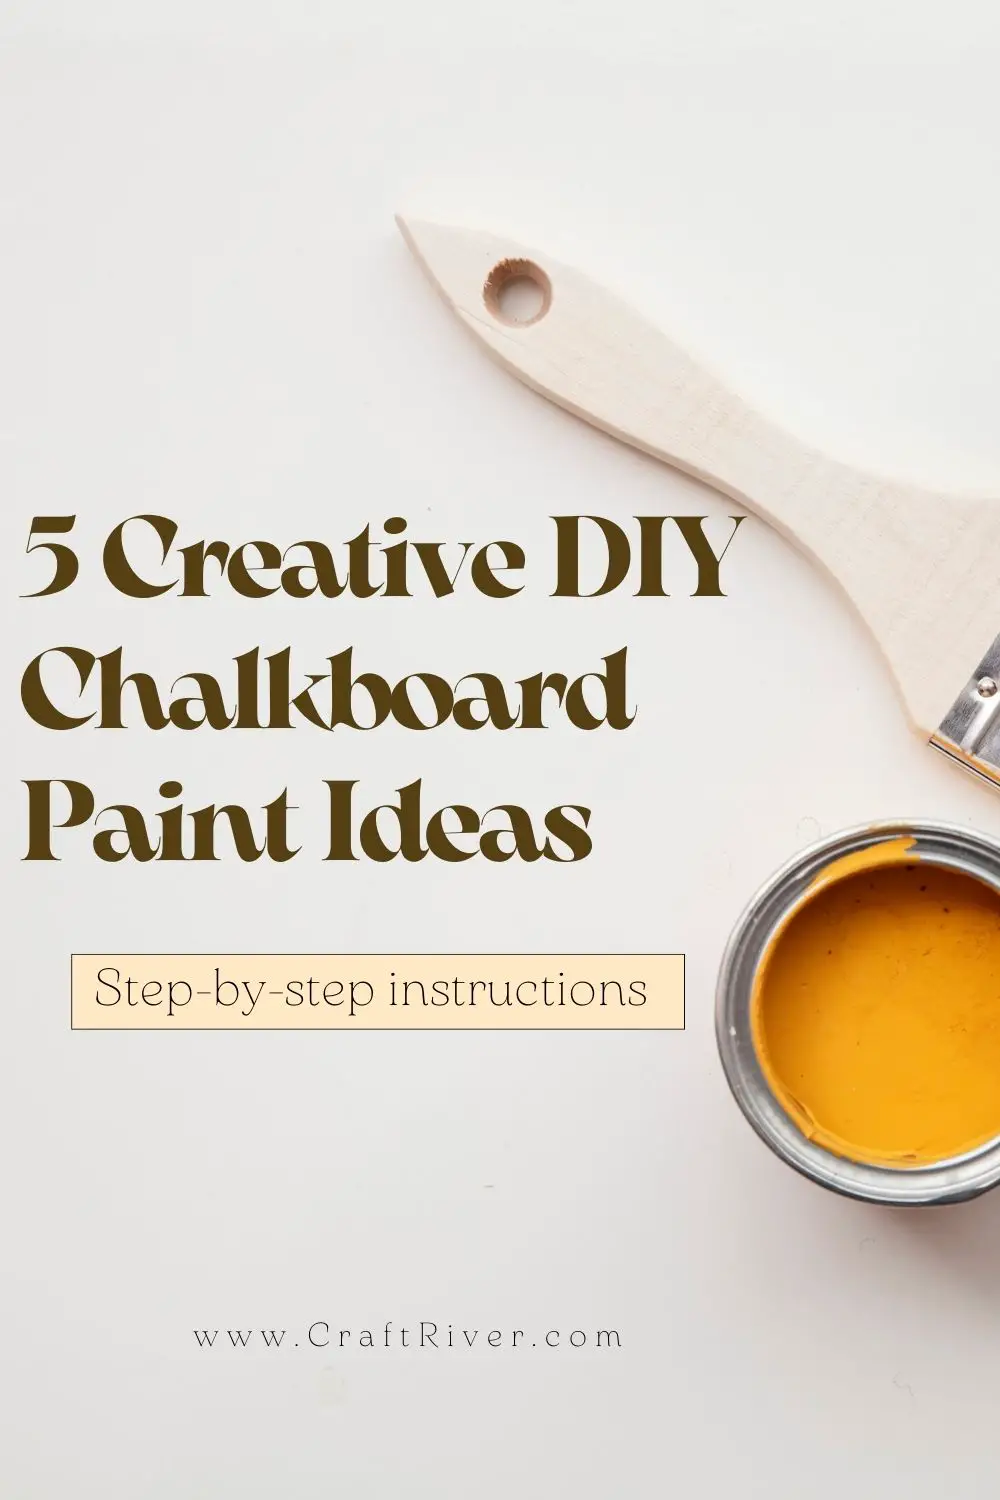 5 DIY Chalkboard Paint Ideas That are Brilliantly Creative